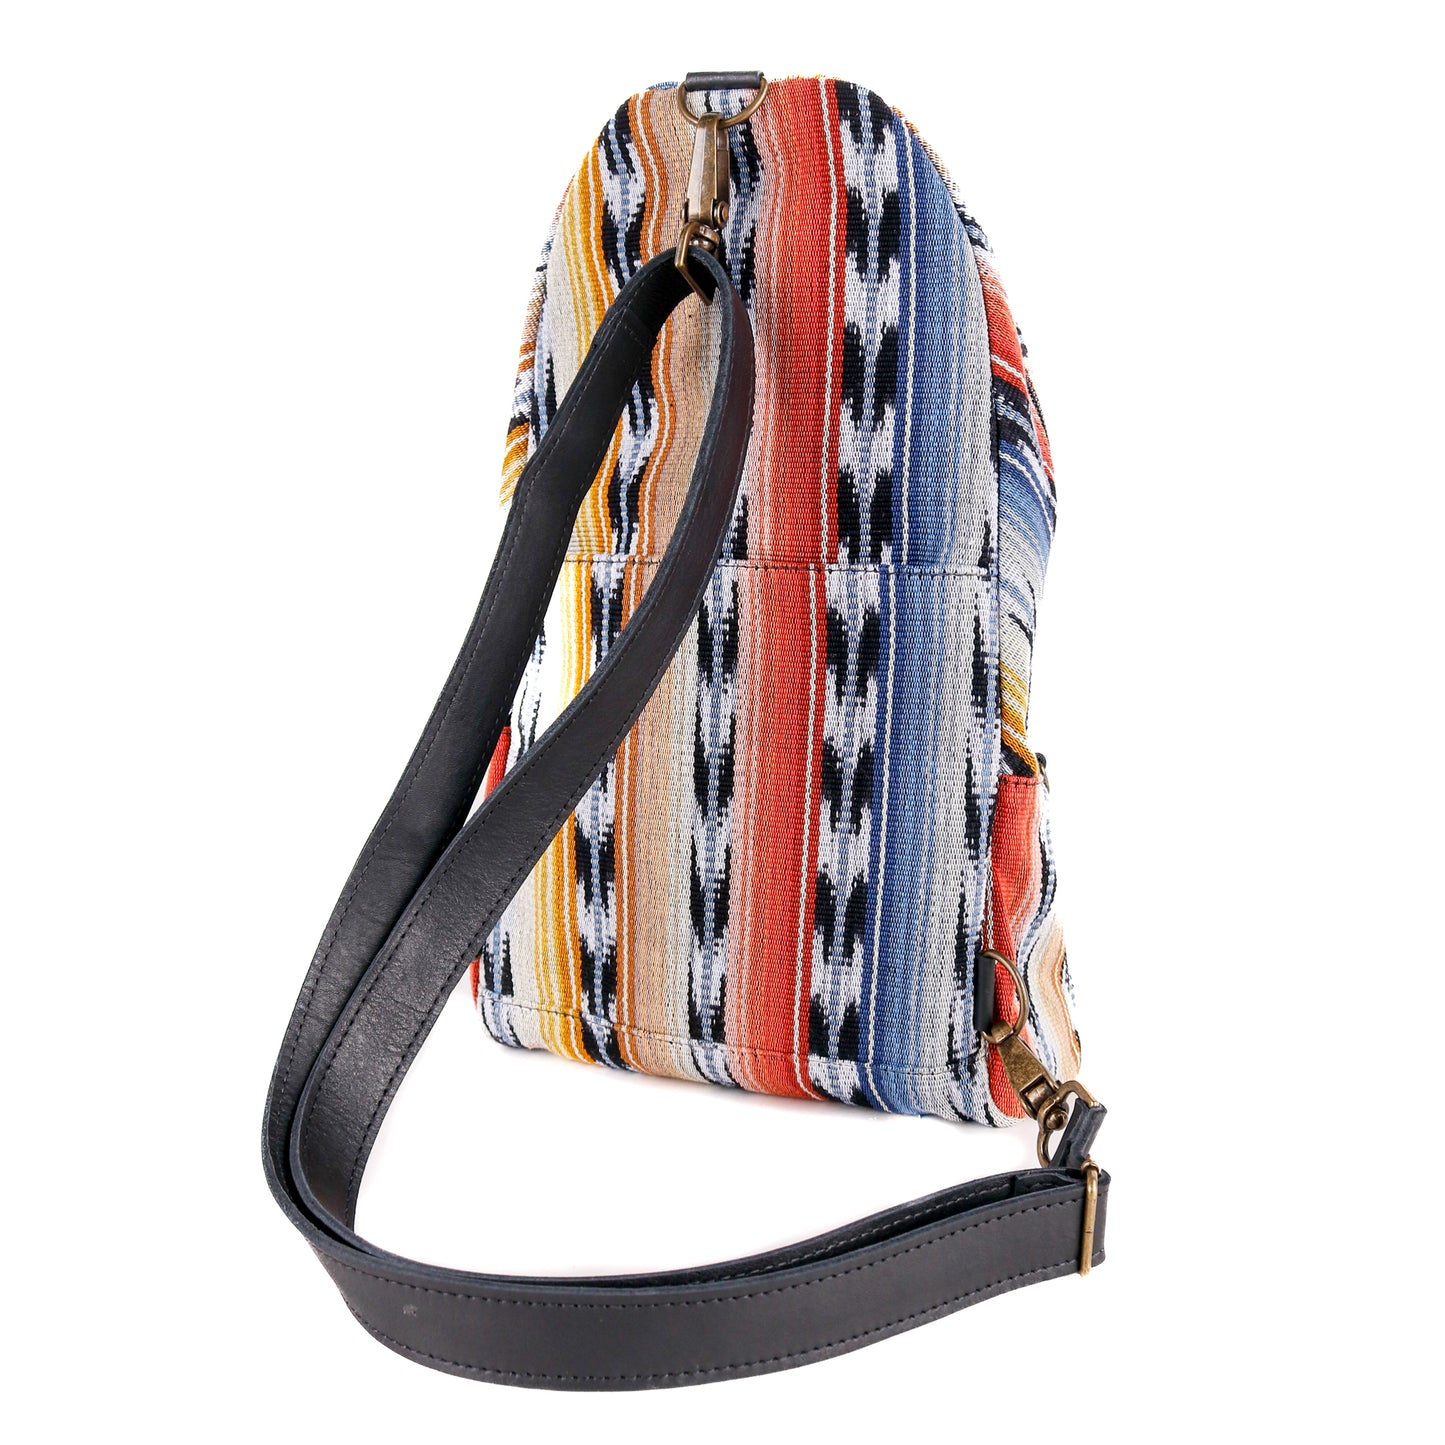 CROSSBODY SLING 2.0 - LARGE - PACIFICA